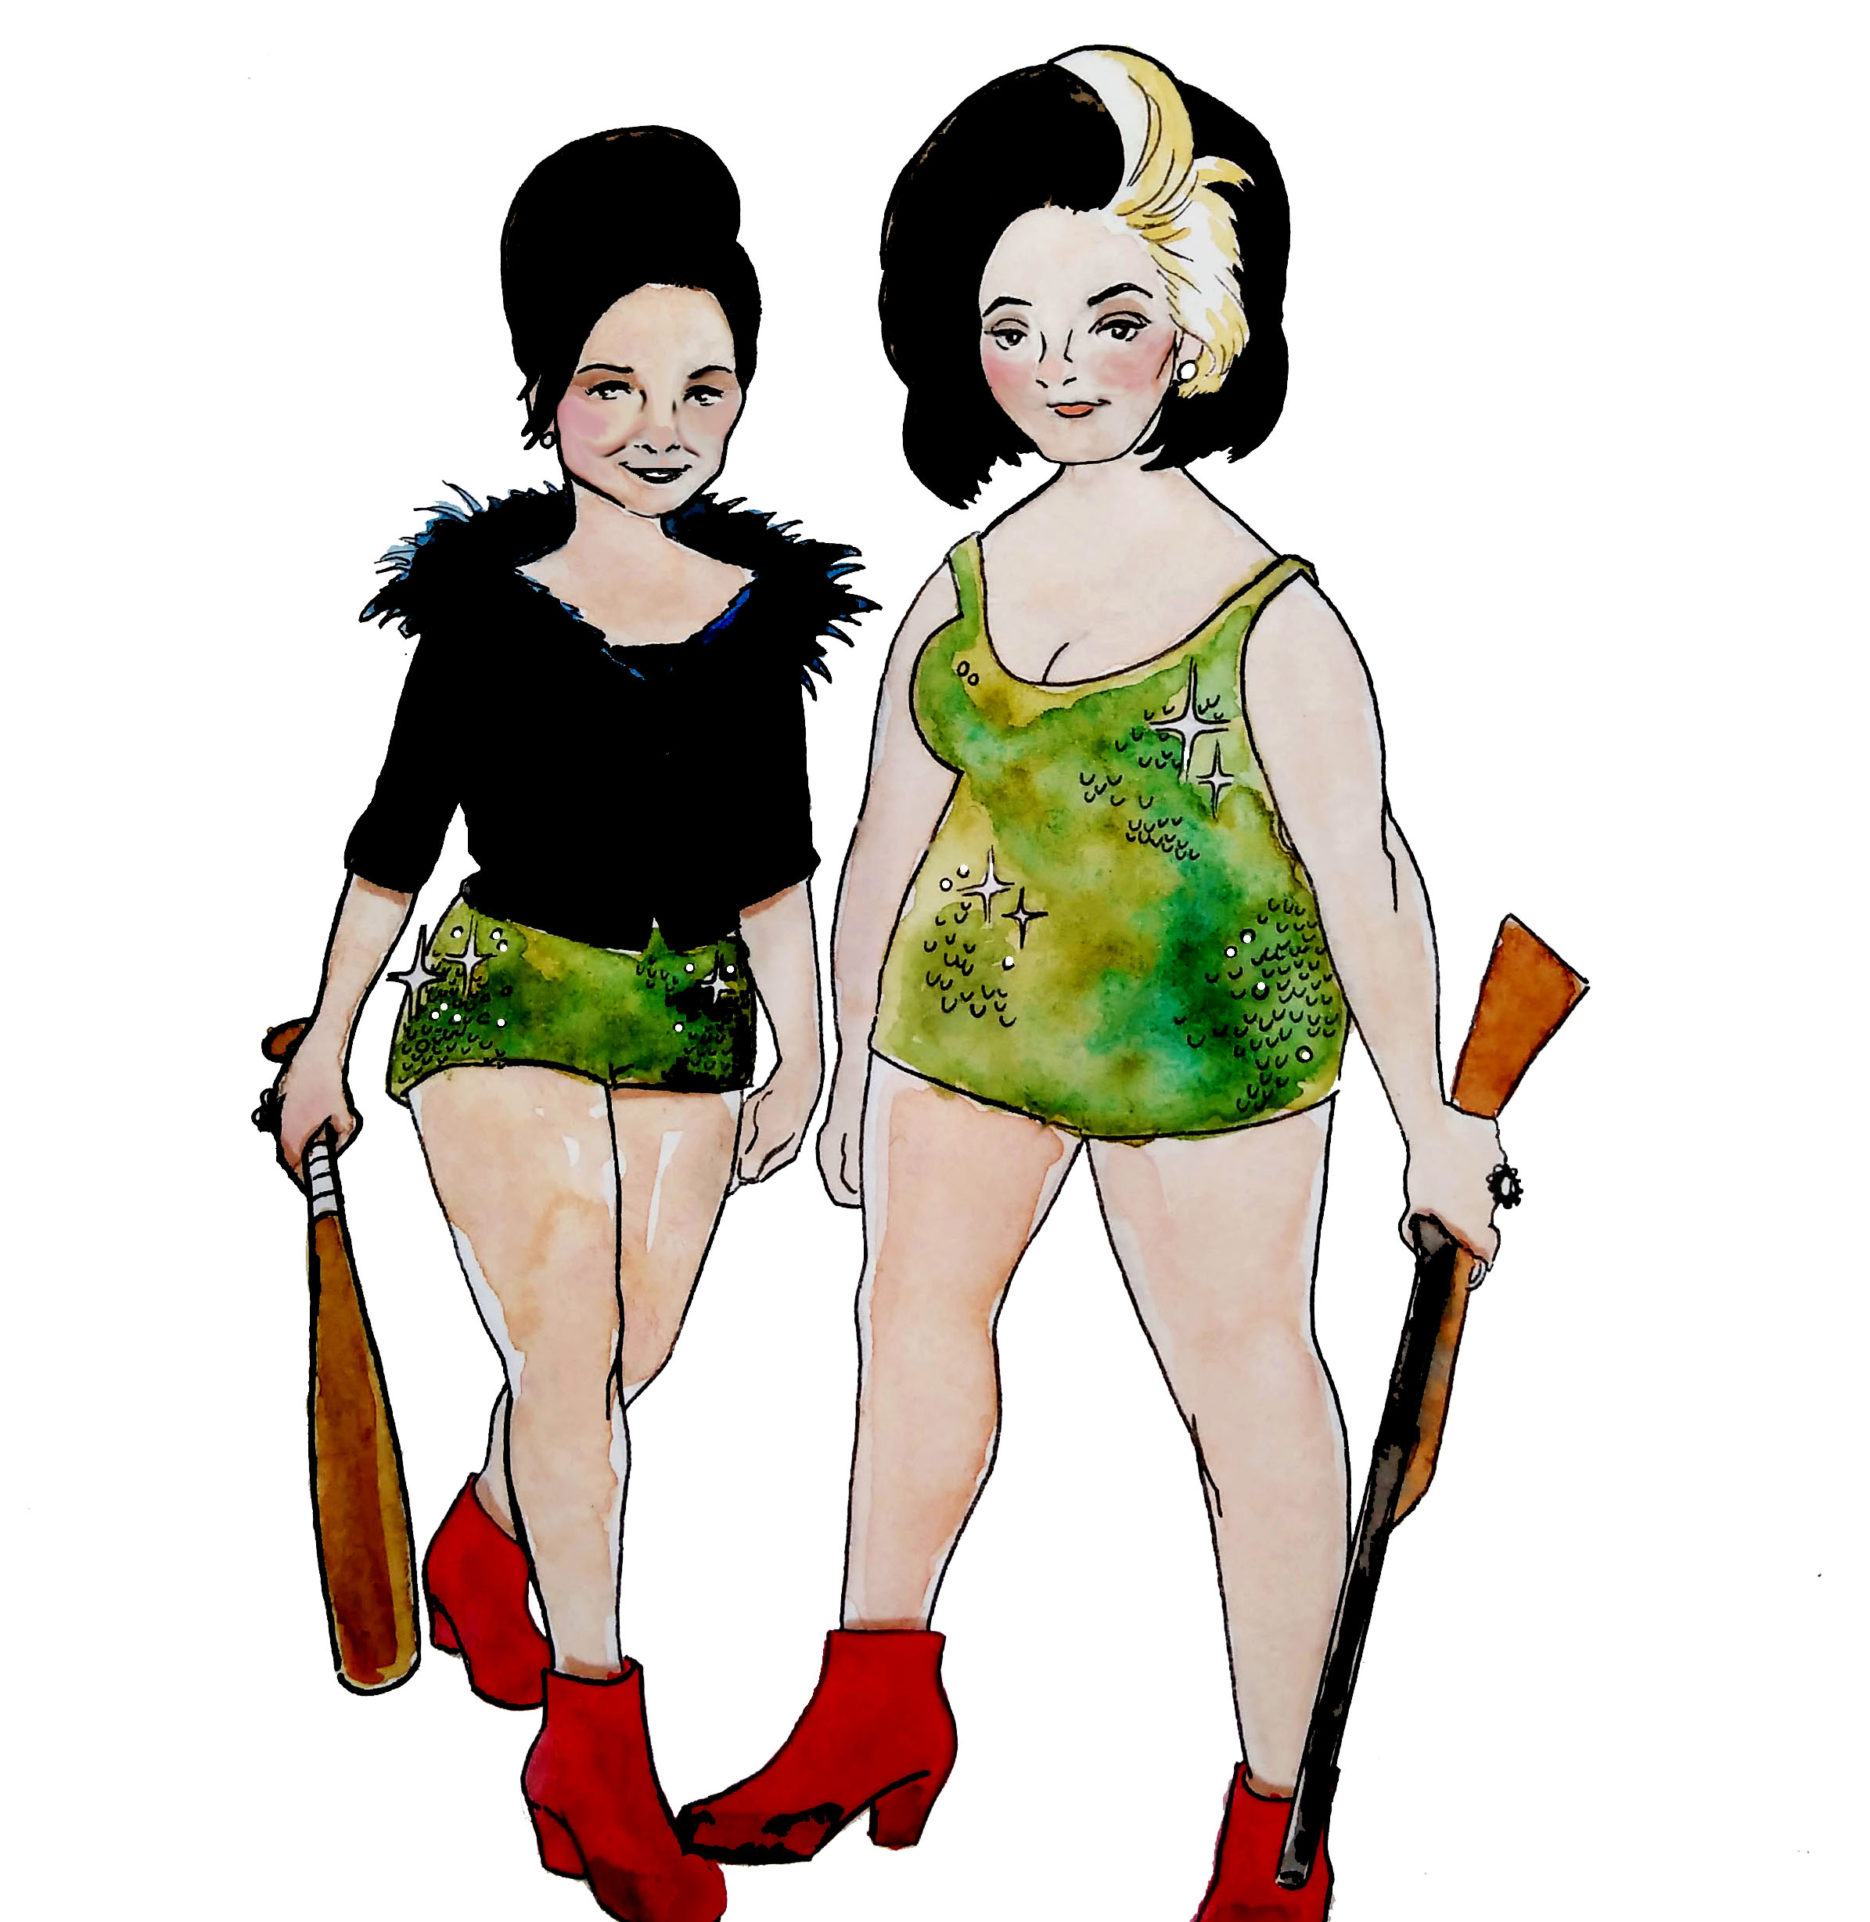 A watercolour painting of Kiri and Rachel, hosts of the "All Killa No Filla" podcast wearing matching green sequined outfits and red boots. Rachel has a black cardigan with a feather collar and Kiri has a blonde streak. Rachel is holding a bat and Kiri is holding a rifle.